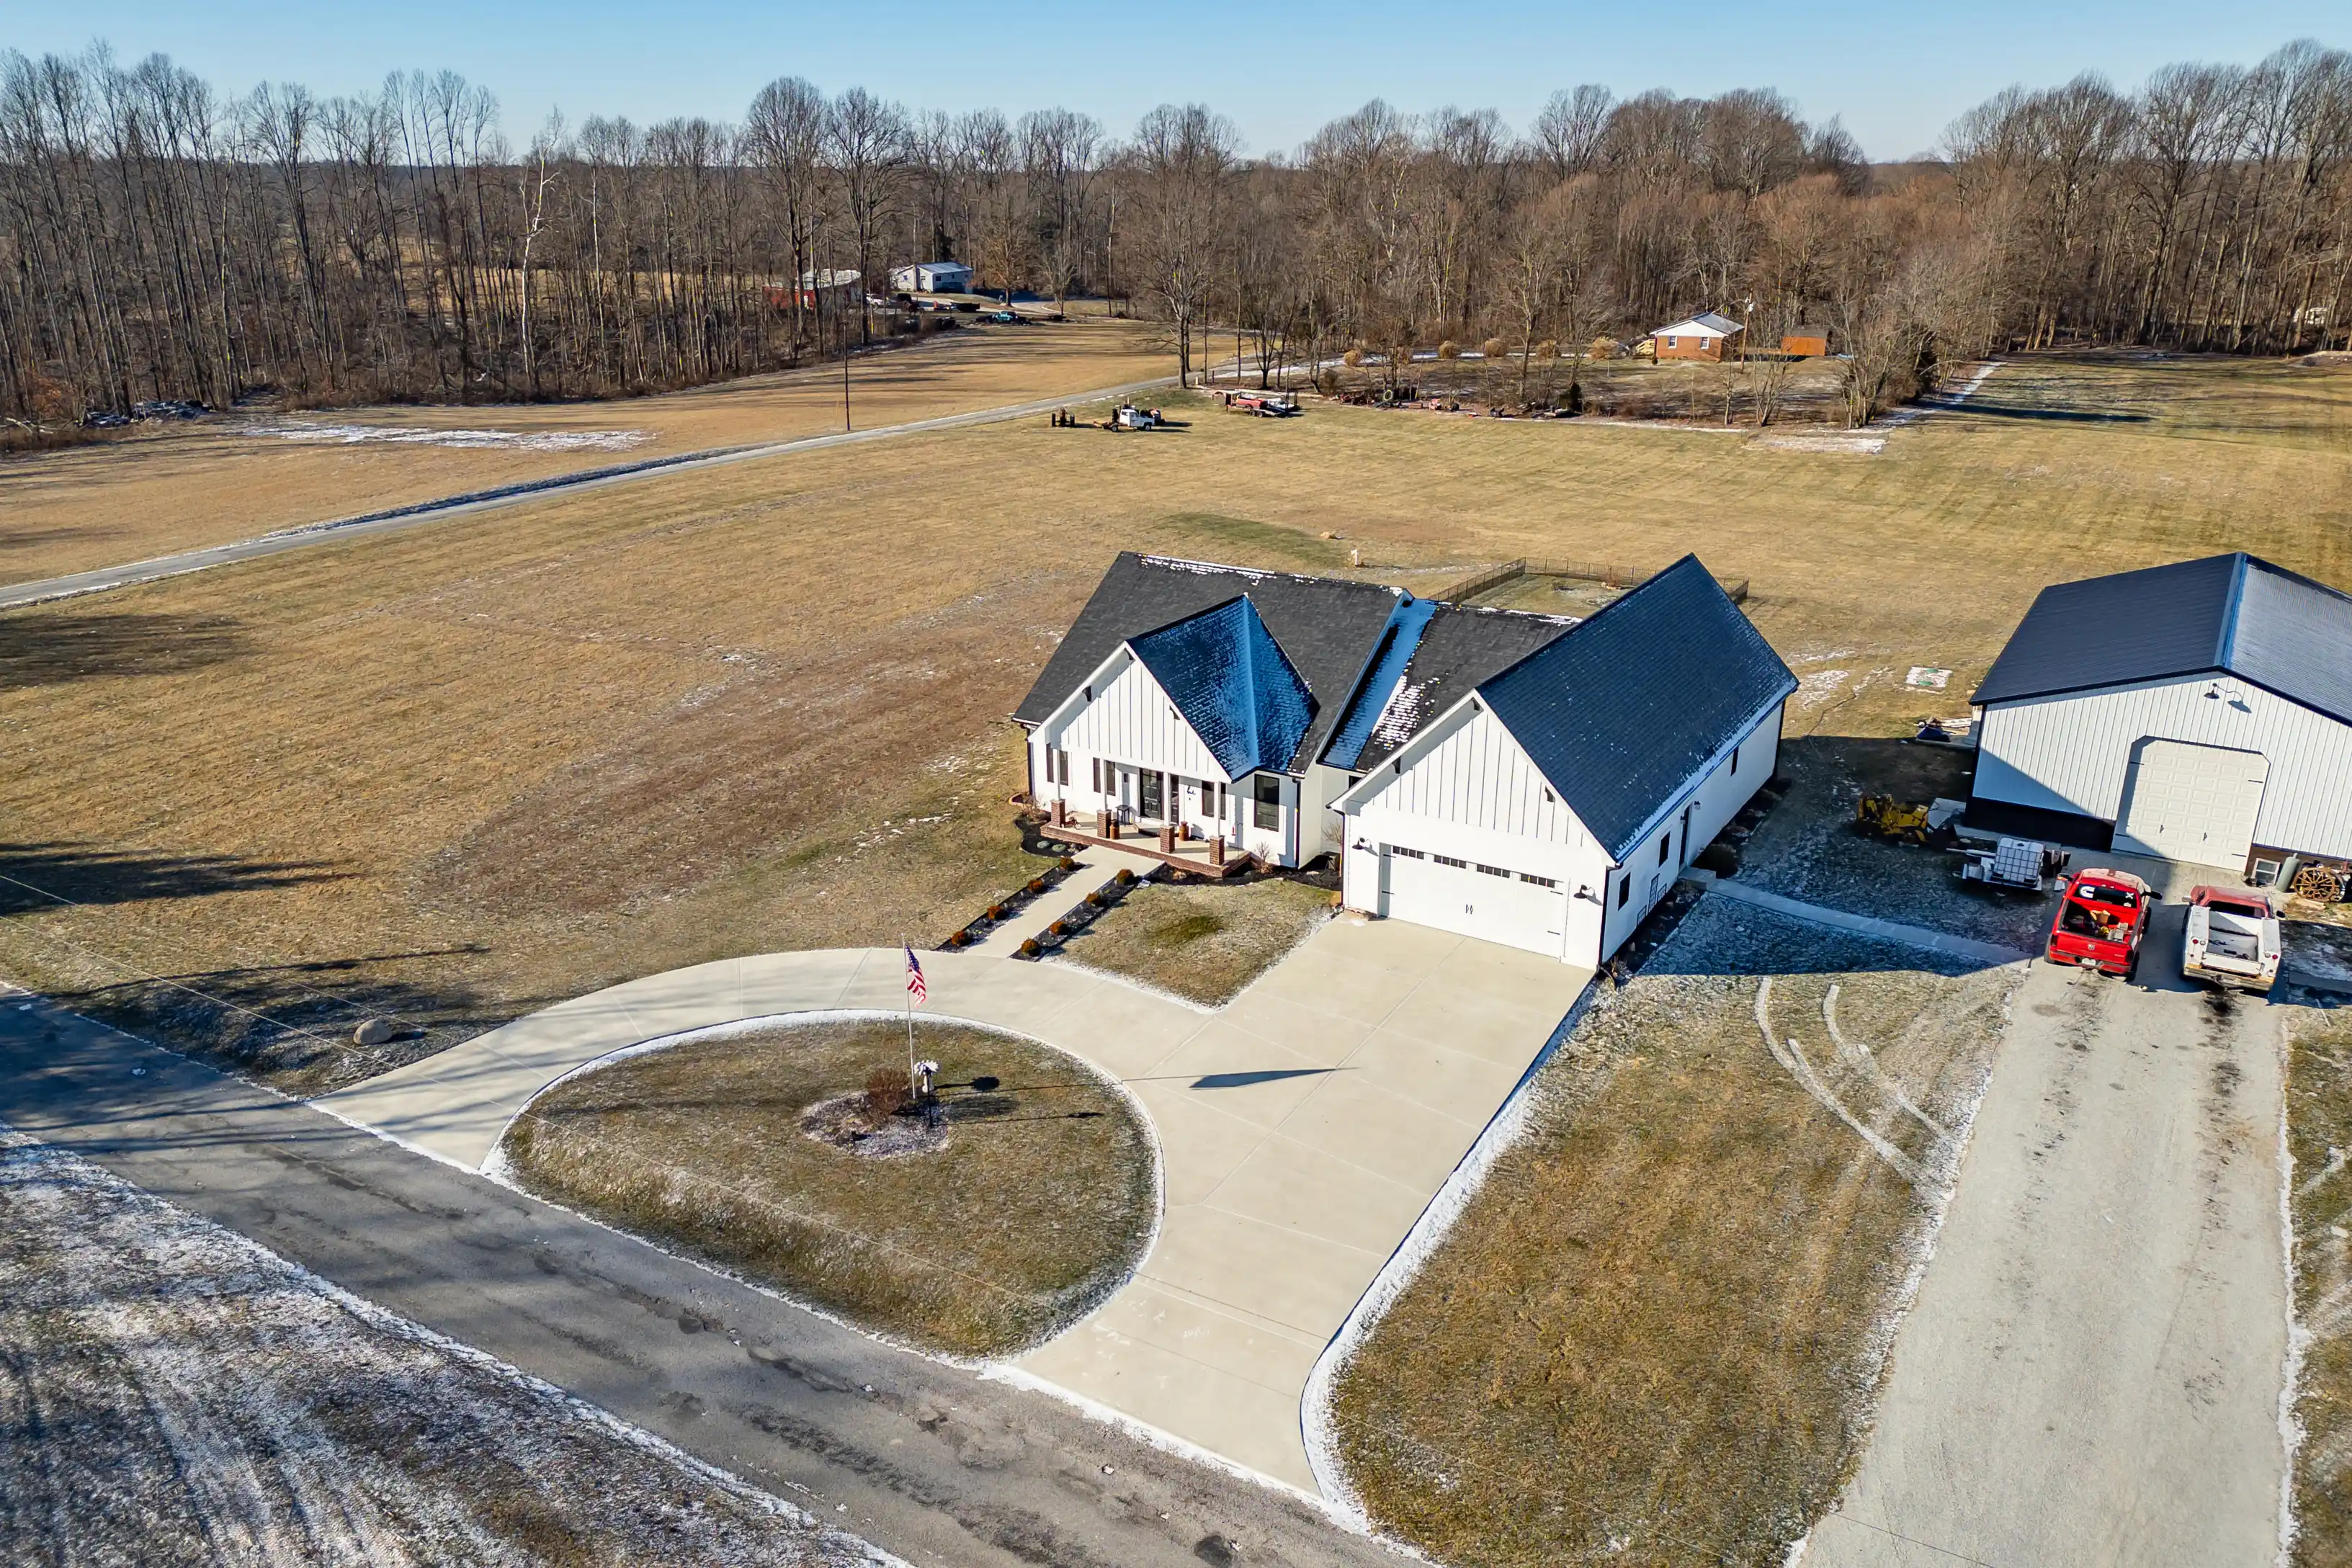 Aerial view of a rural residential property with a white house and separate garage, circular driveway, and surrounding grassy fields, with trees in the background.